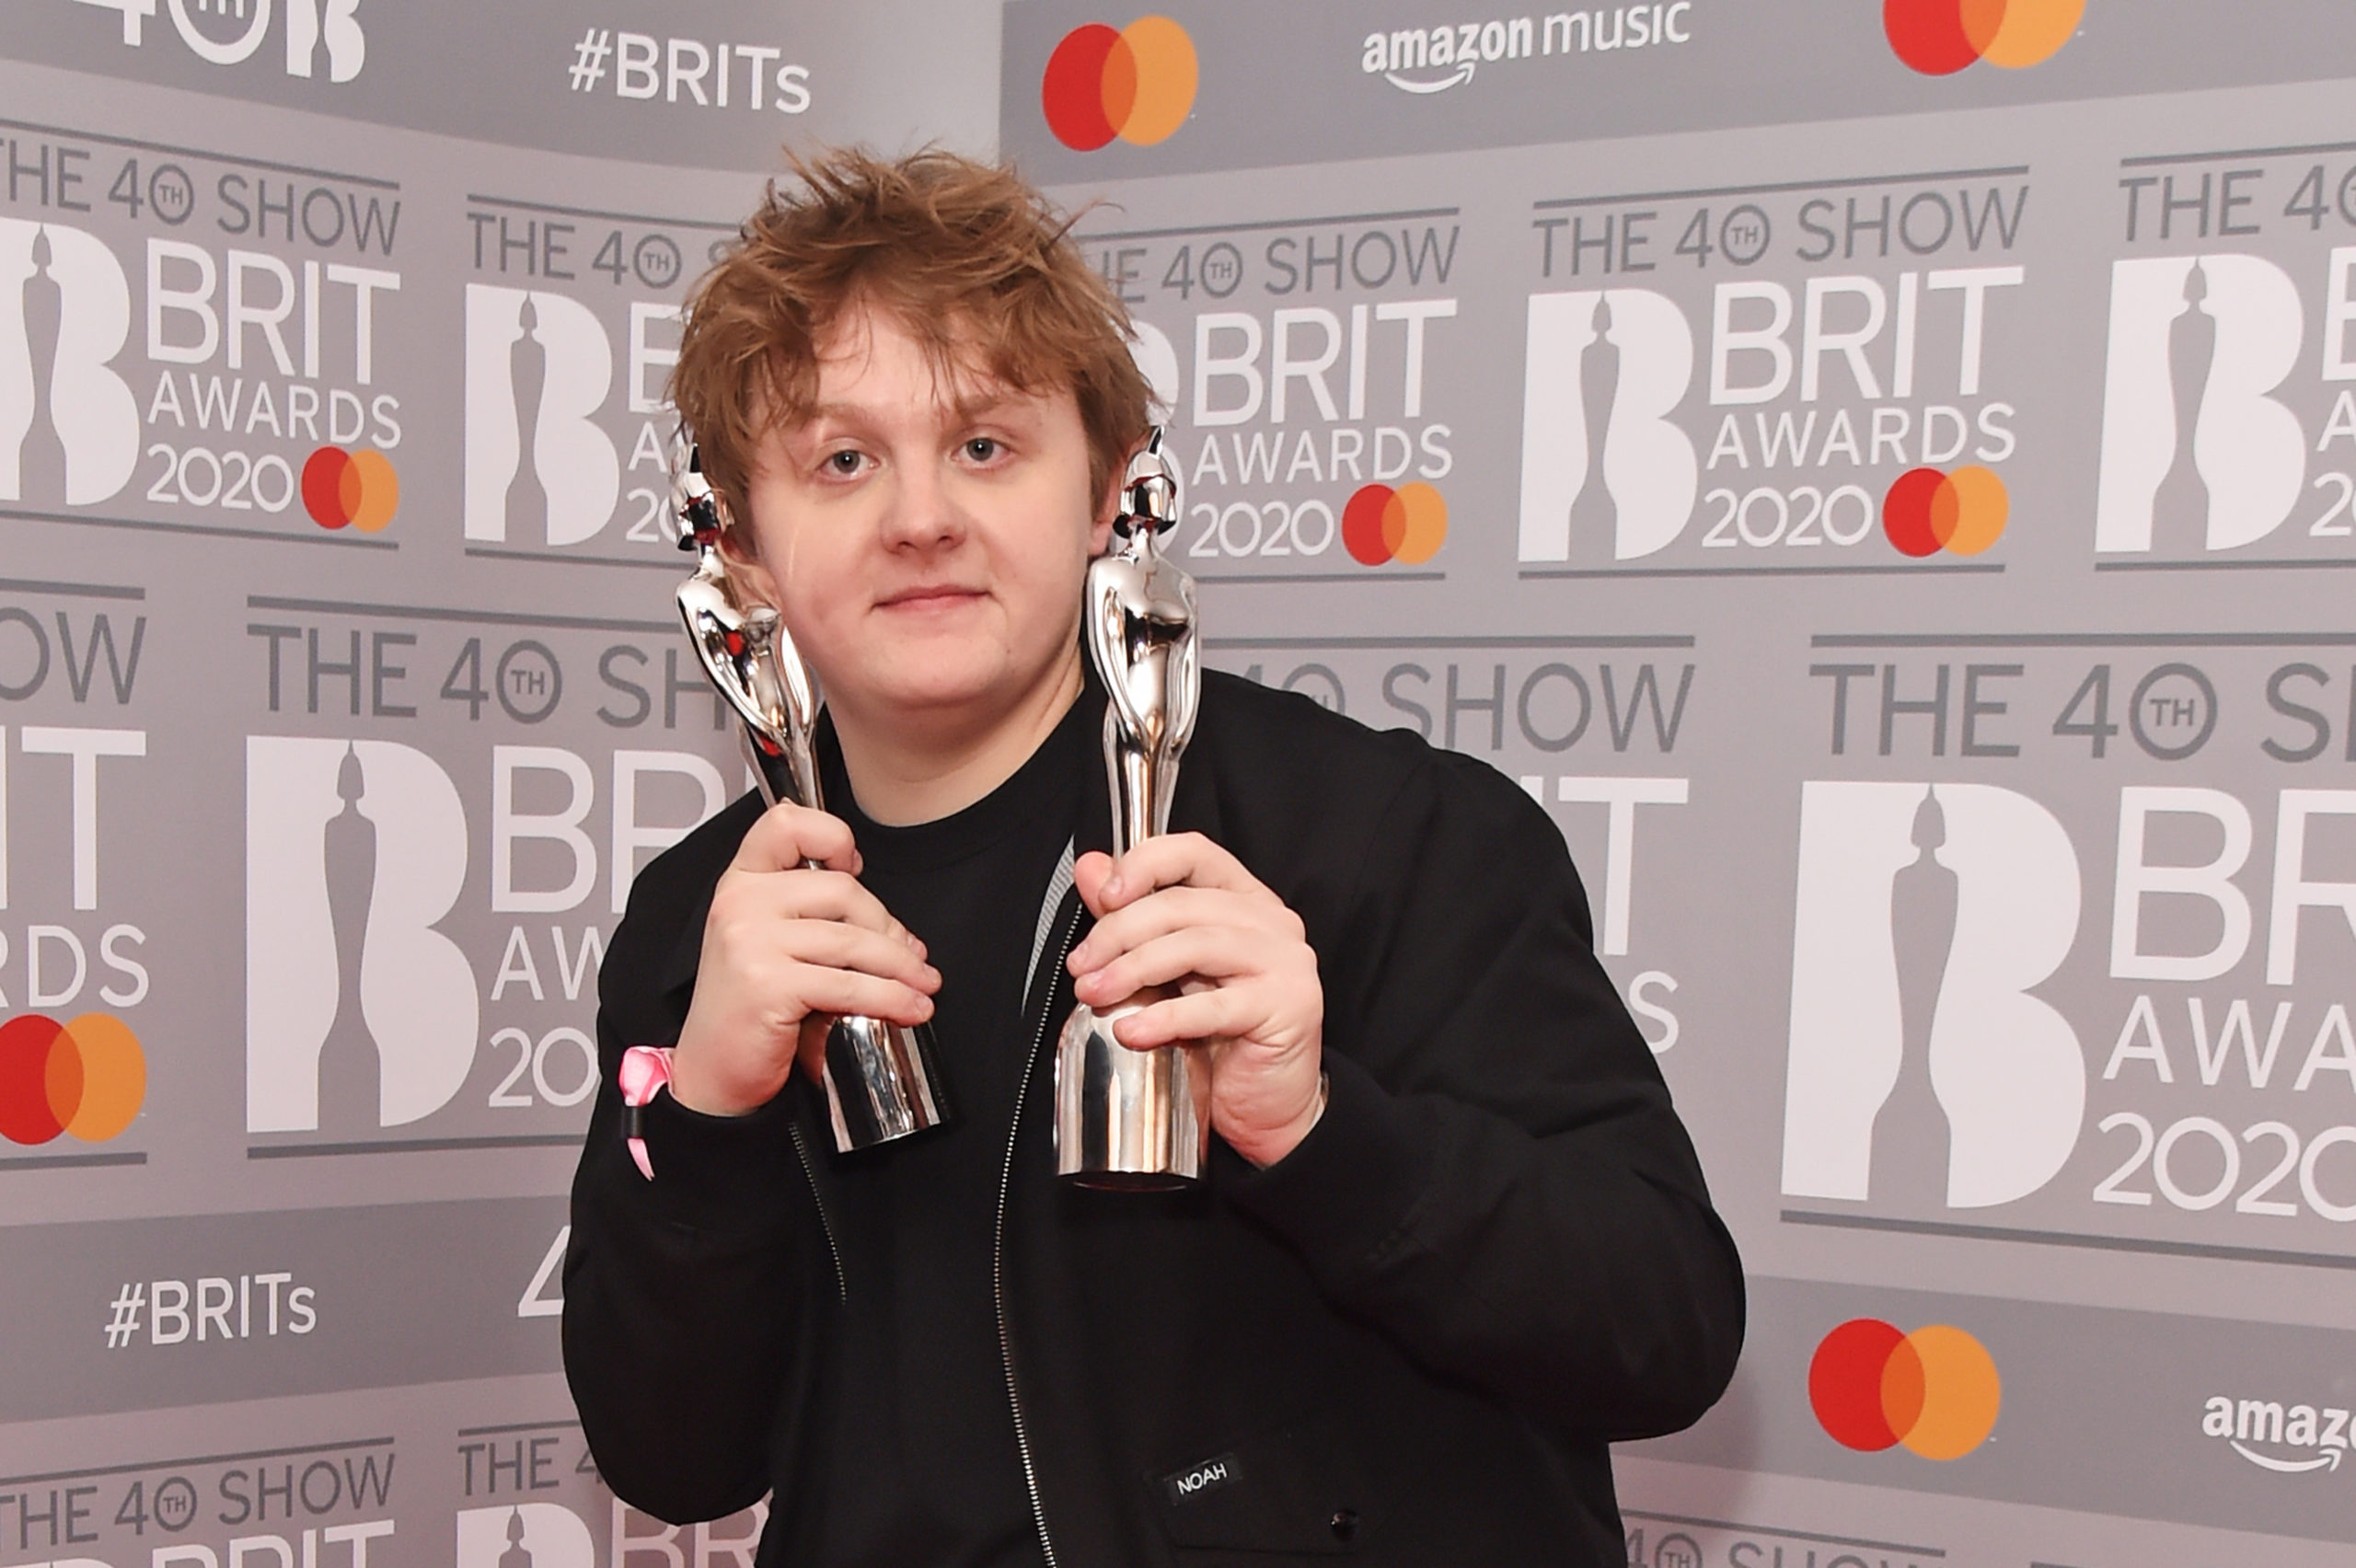 Chart-topper: Brit Award-winner Lewis Capaldi. <strong>GETTY IMAGES</strong>”/><cite class=cite>Getty Images</cite></div><figcaption aria-hidden=true>Chart-topper: Brit Award-winner Lewis Capaldi. <strong>GETTY IMAGES</strong> <cite class=hidden>Getty Images</cite></figcaption></figure><p>Speaking about Capaldi’s Tenement Trail appearance a few years ago, she joked: “I think he was really low down on the poster and we paid him £50. I don’t think £50 would cut it these days.</p><p>“We loved his music. He’s a great guy, we know him quite well.”</p><p>Walker said it was “amazing” to see performers go on to become worldwide names.</p><p>Past Tenement TV acts include Bastille, Catfish and the Bottlemen and Sam Fender.</p><figure class=